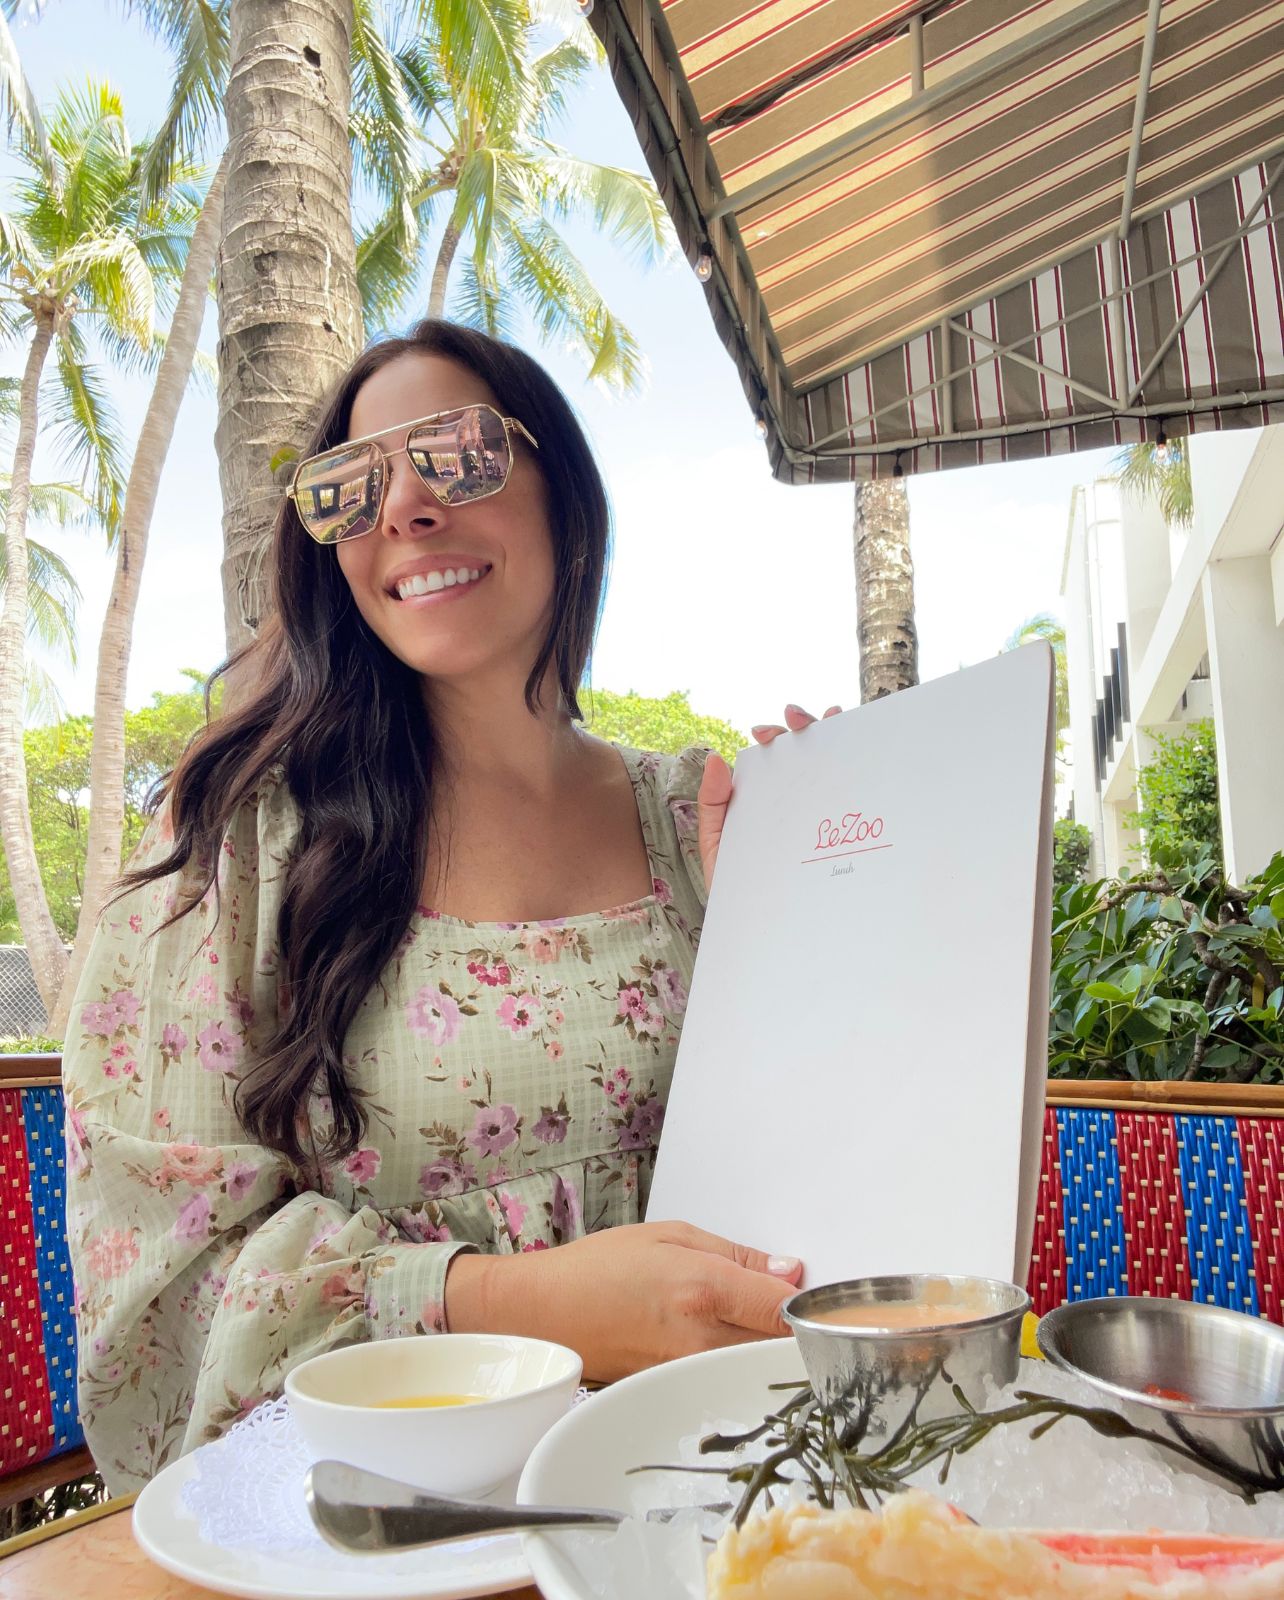 Woman smiles with a Le Zoo menu